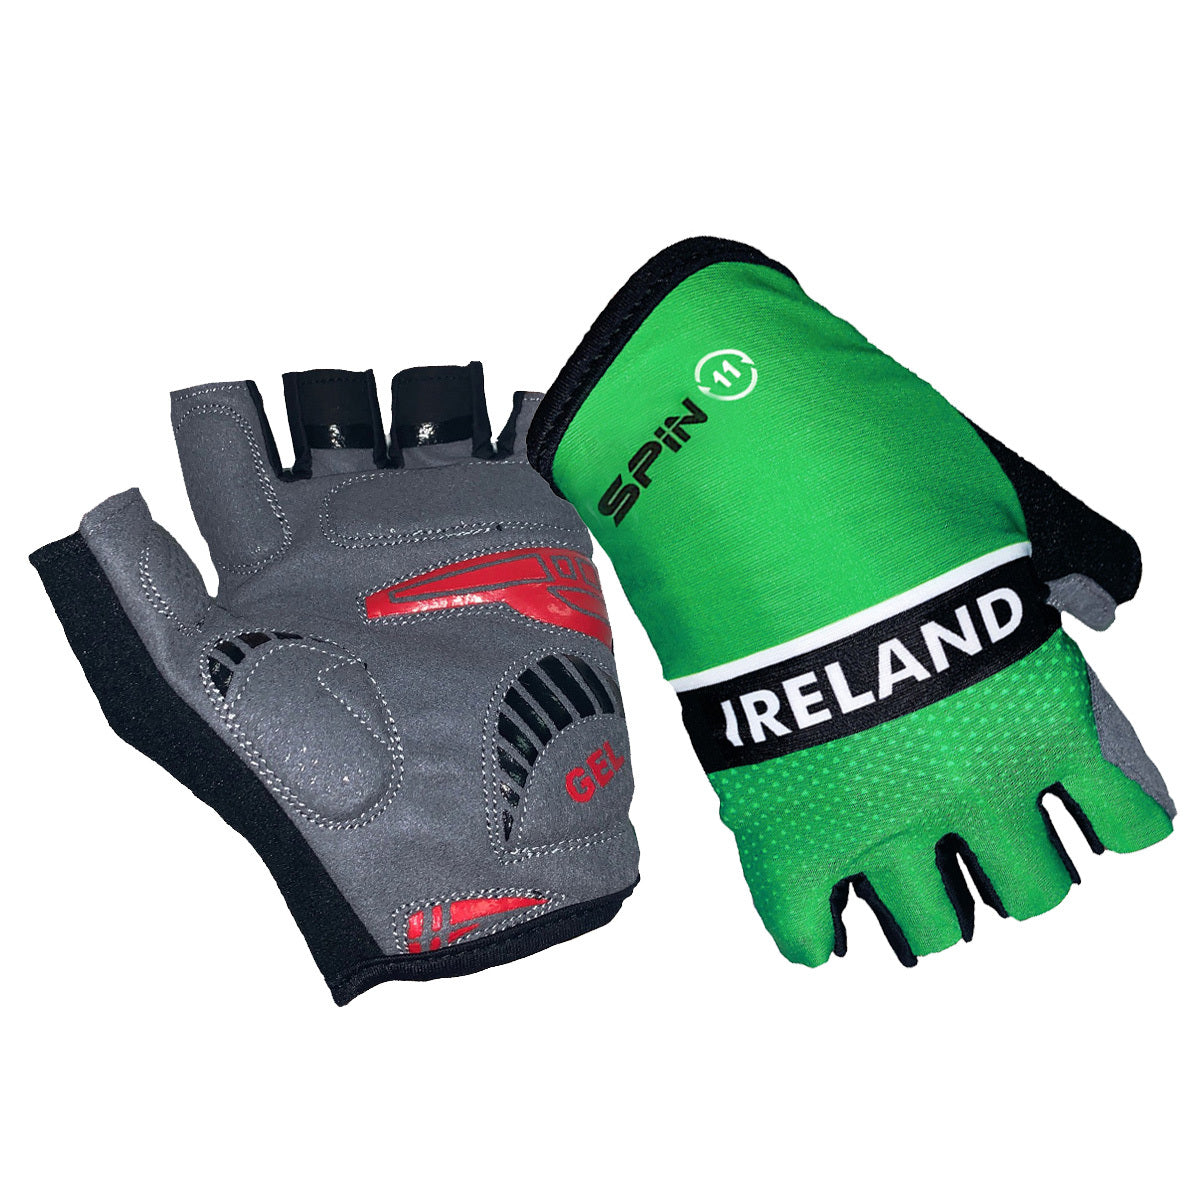 Official Team Ireland Cycling Gloves